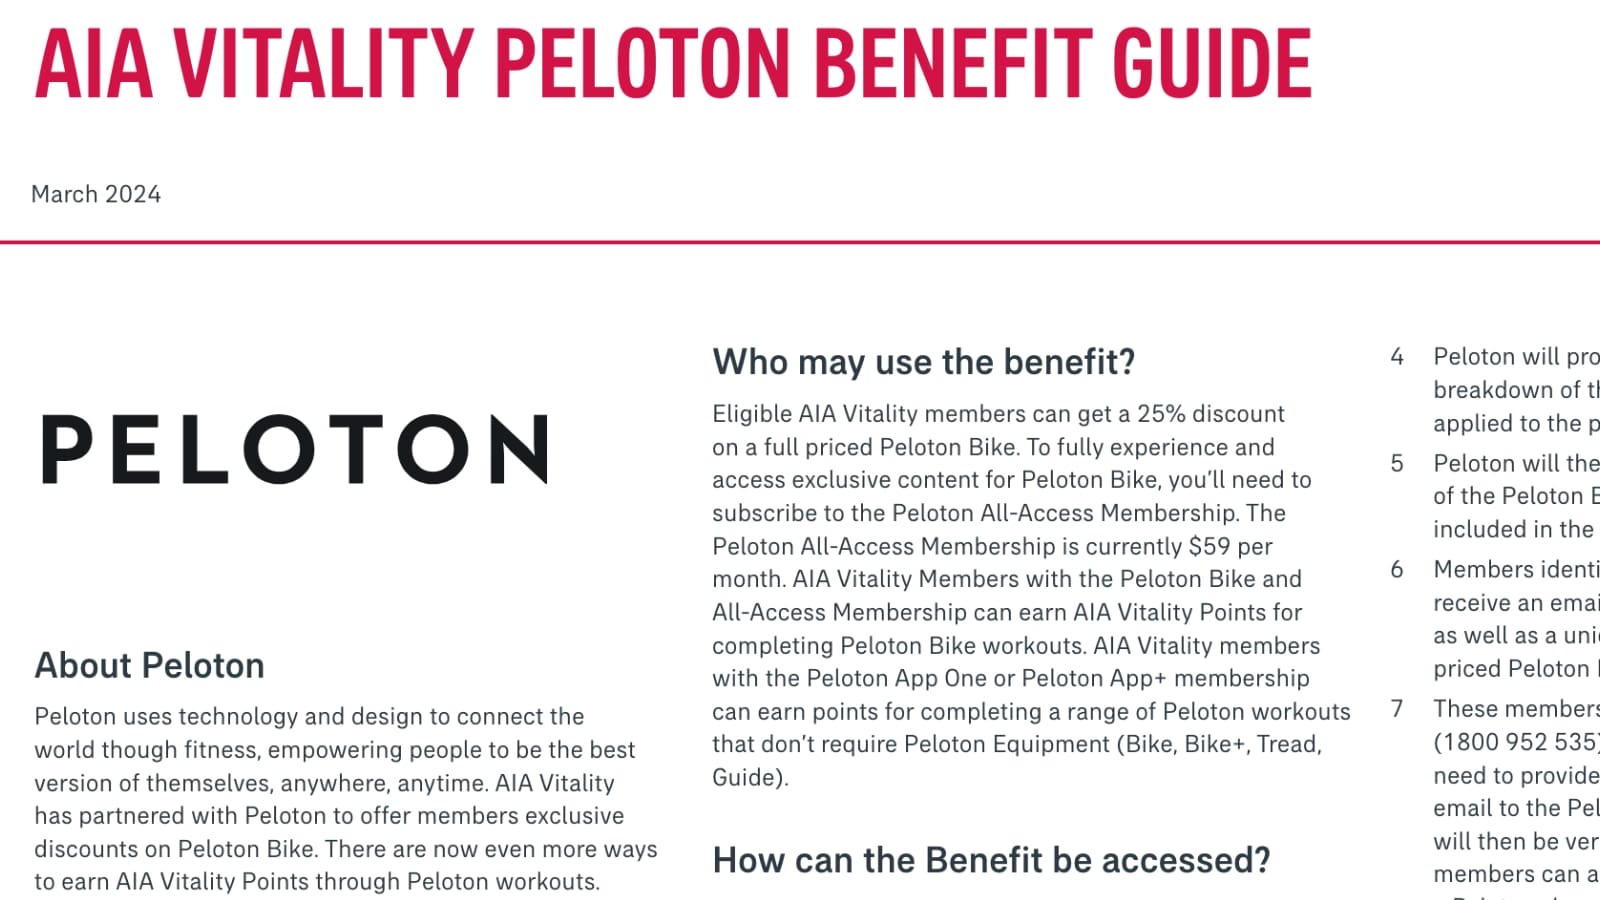 AIA information page about Peloton partnership.